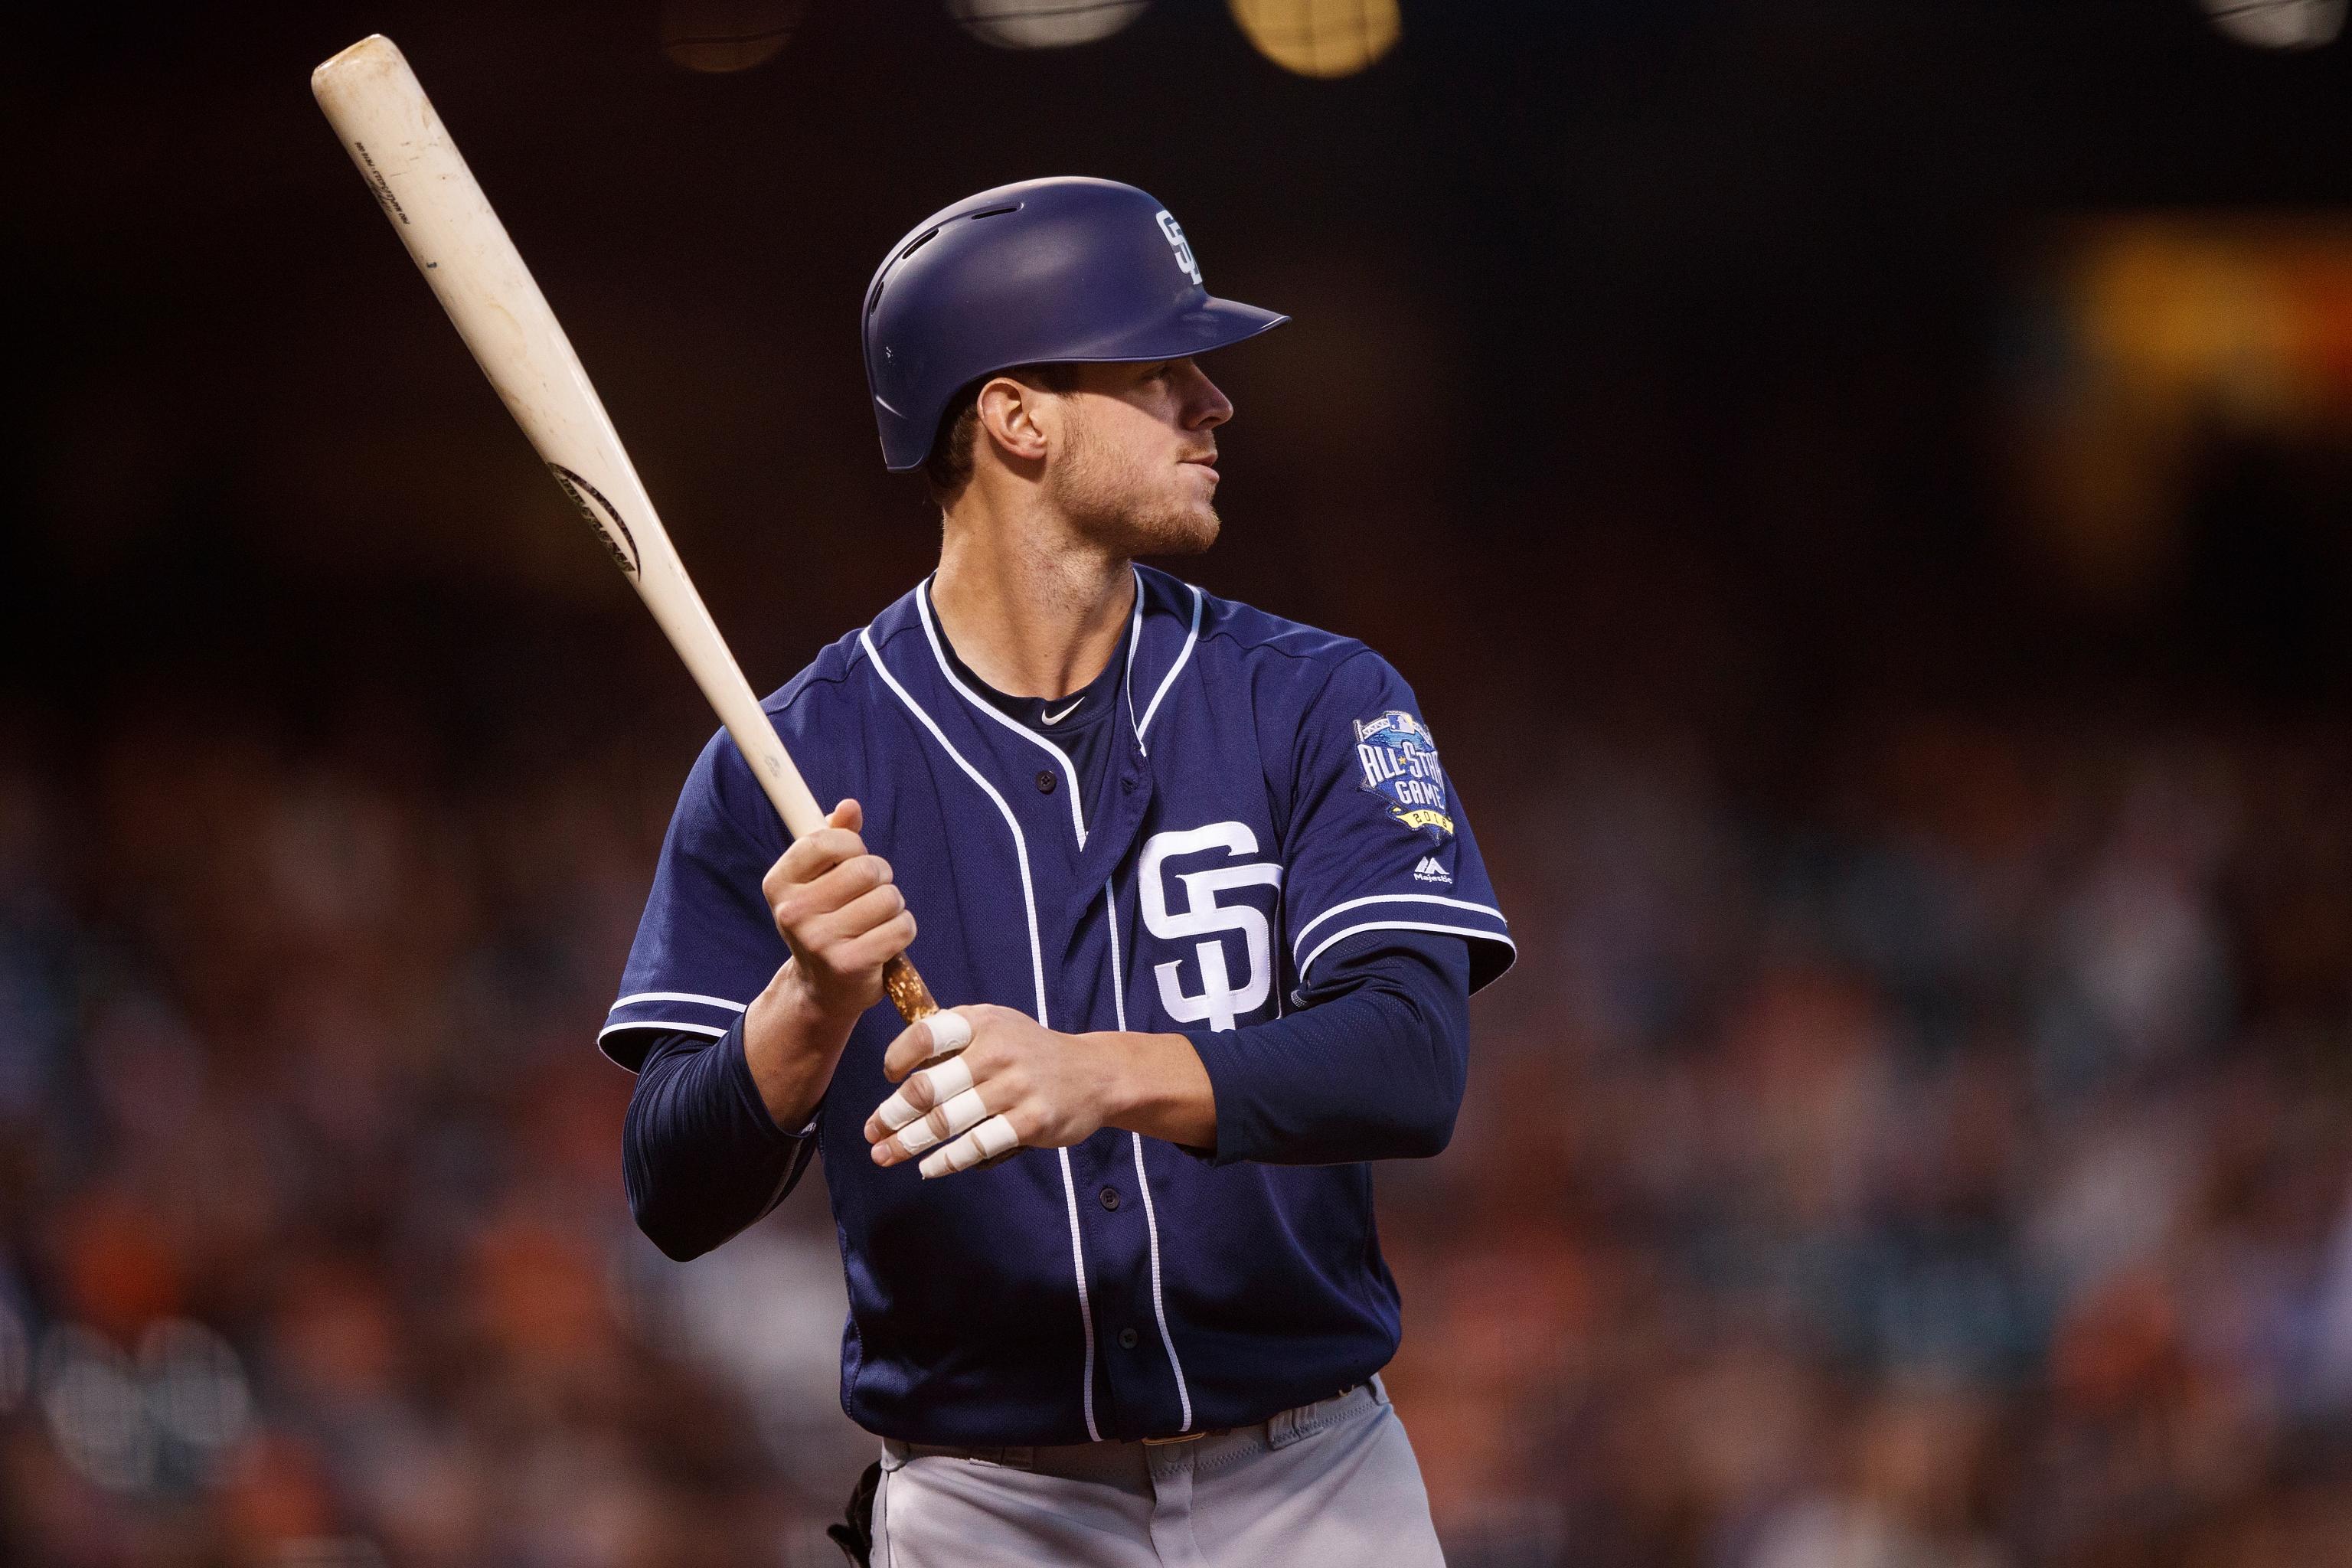 New Cutwater Spirits promotion features Padre Wil Myers